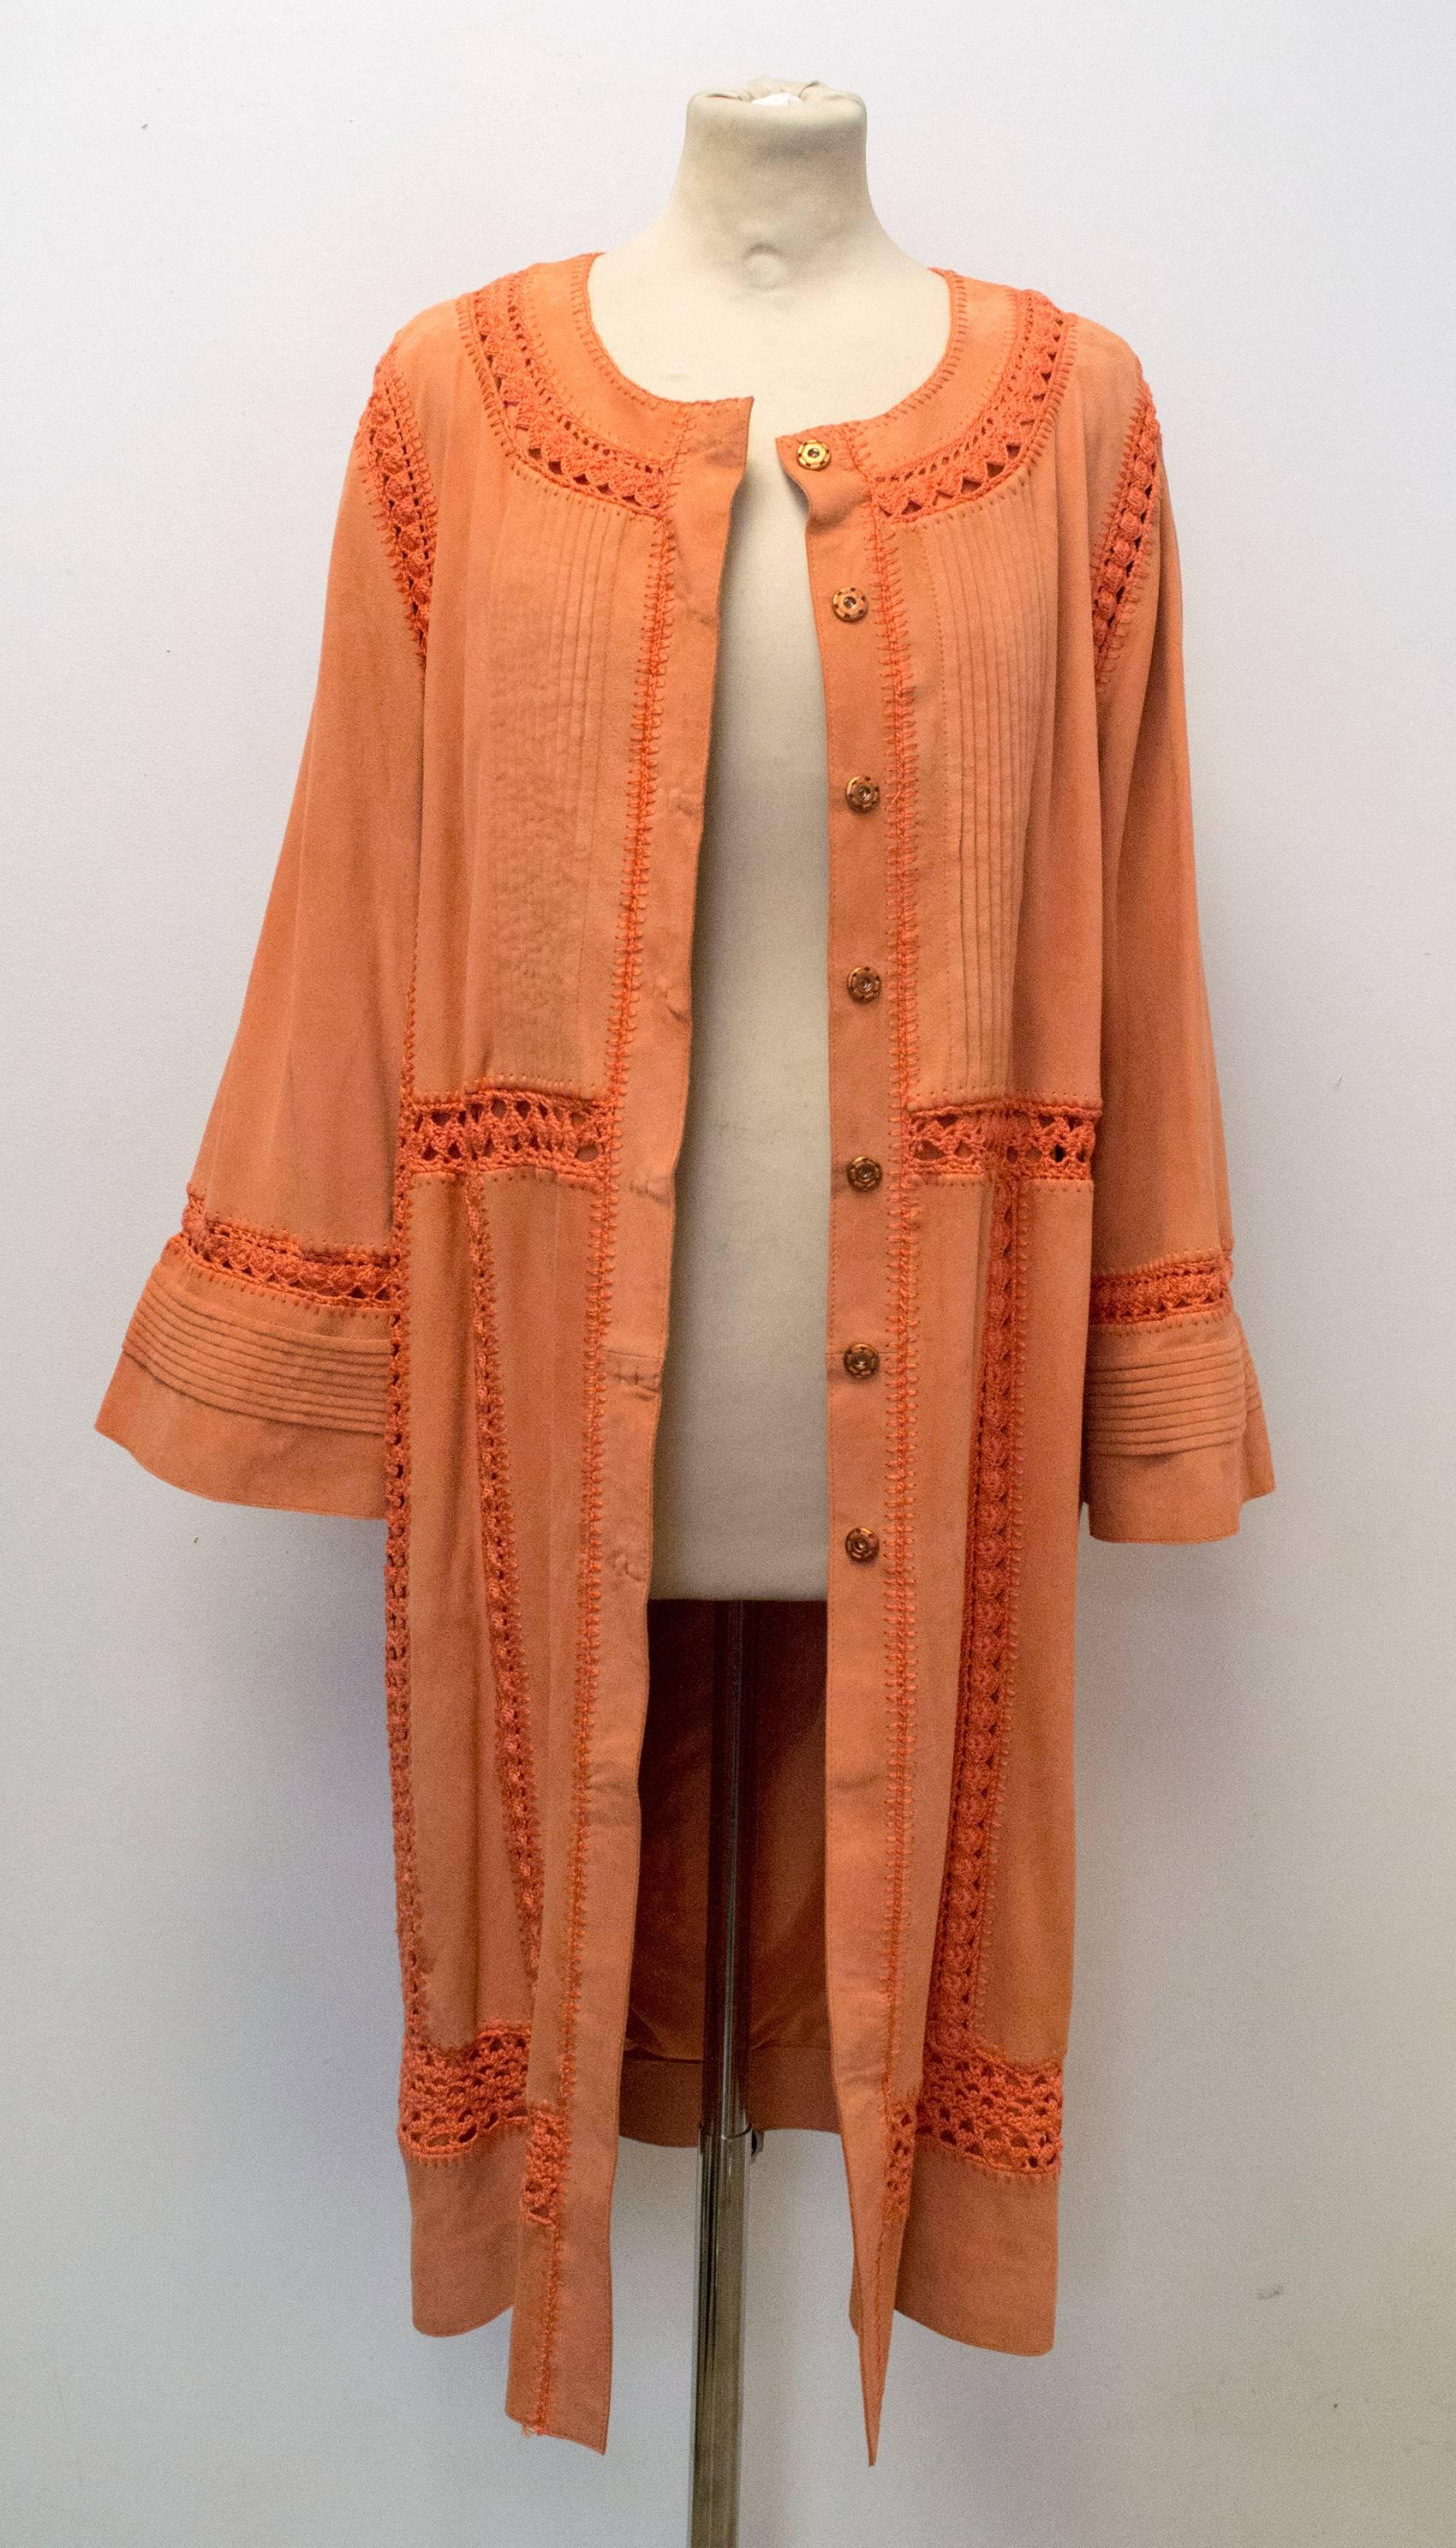 Bright orange suede goatsking coat.  The coat is done up using the seven invsible poppers down the front.  There is  woven in crochet detailing running vertically down each side of the front and back of the jacket, as well as around the neckline, on